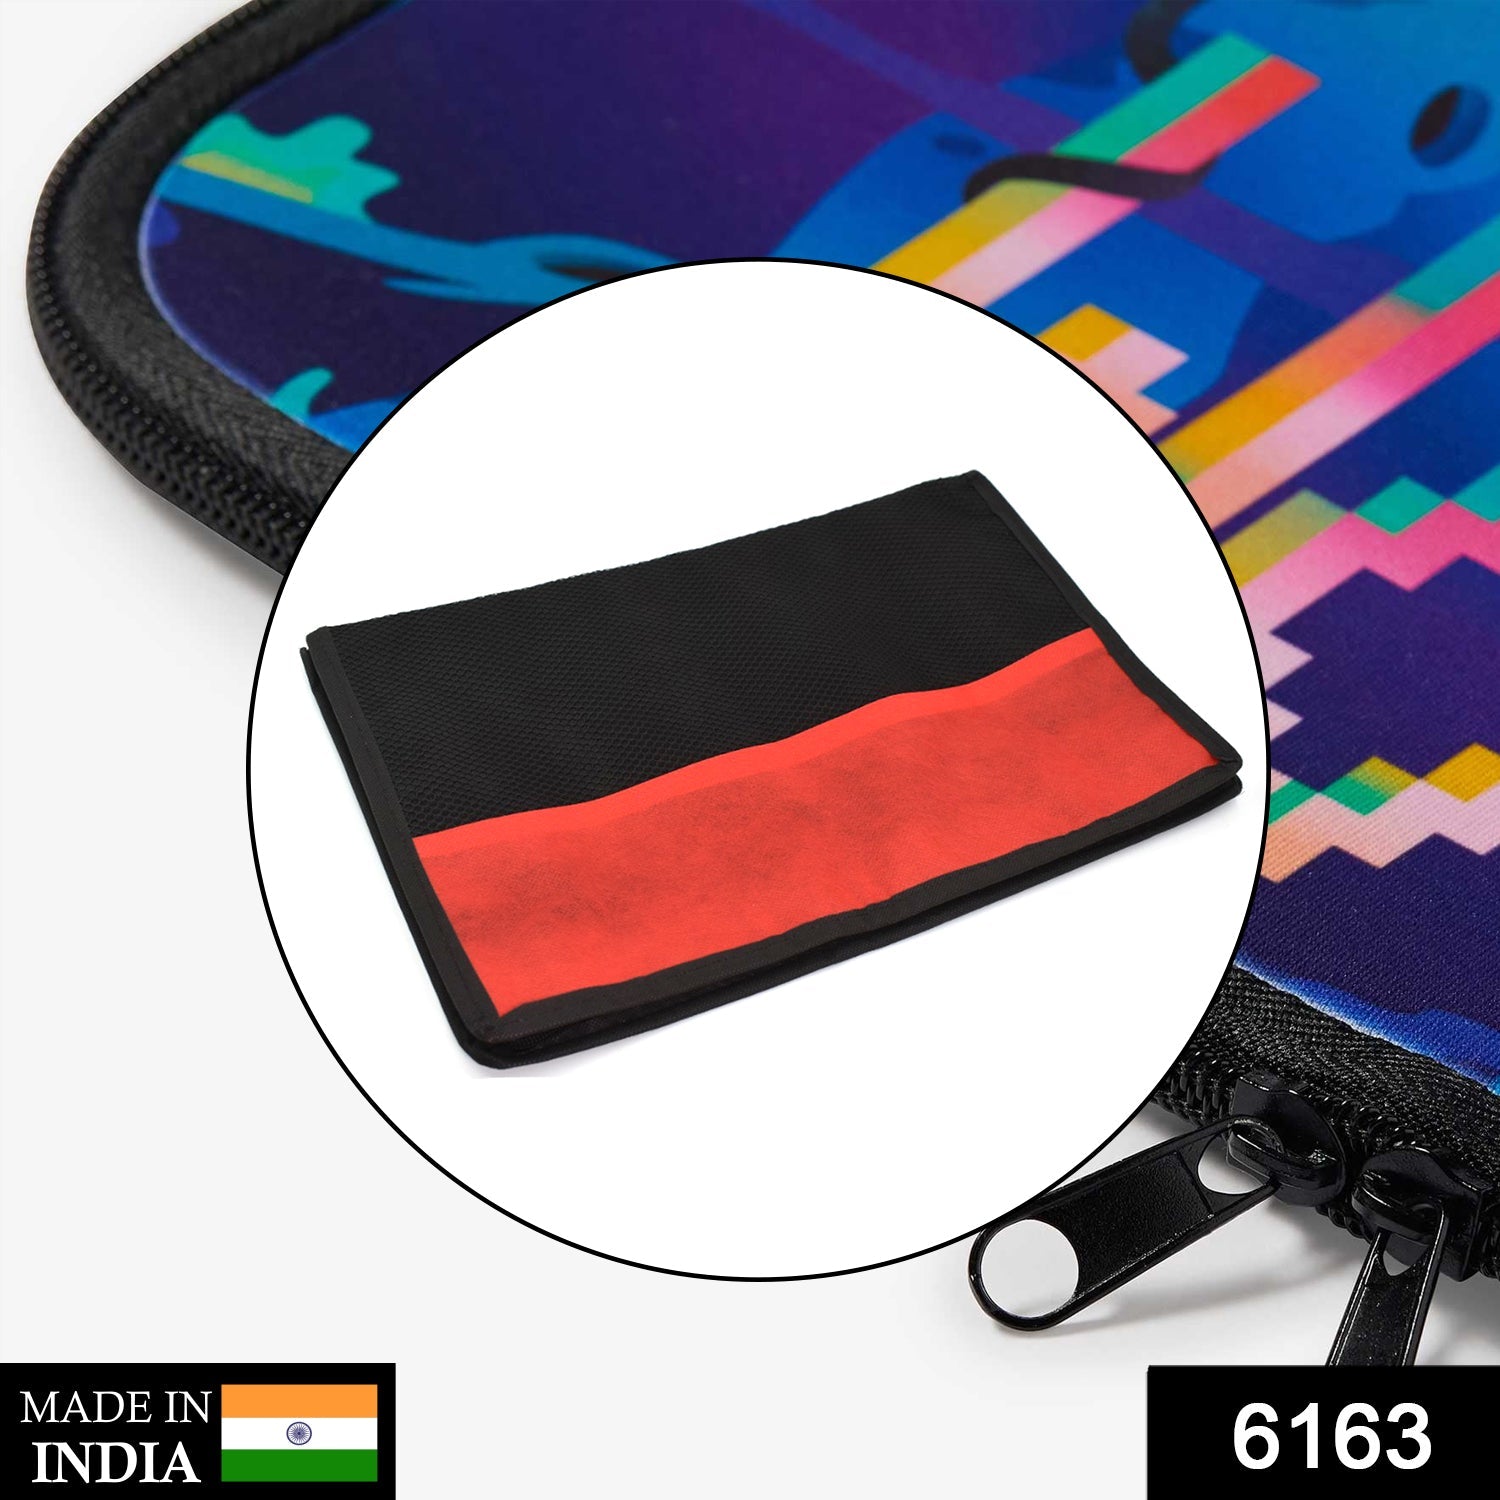 6163 Laptop Cover Bag Used As A Laptop Holder To Get Along With Laptop Anywhere Easily. freeshipping DeoDap